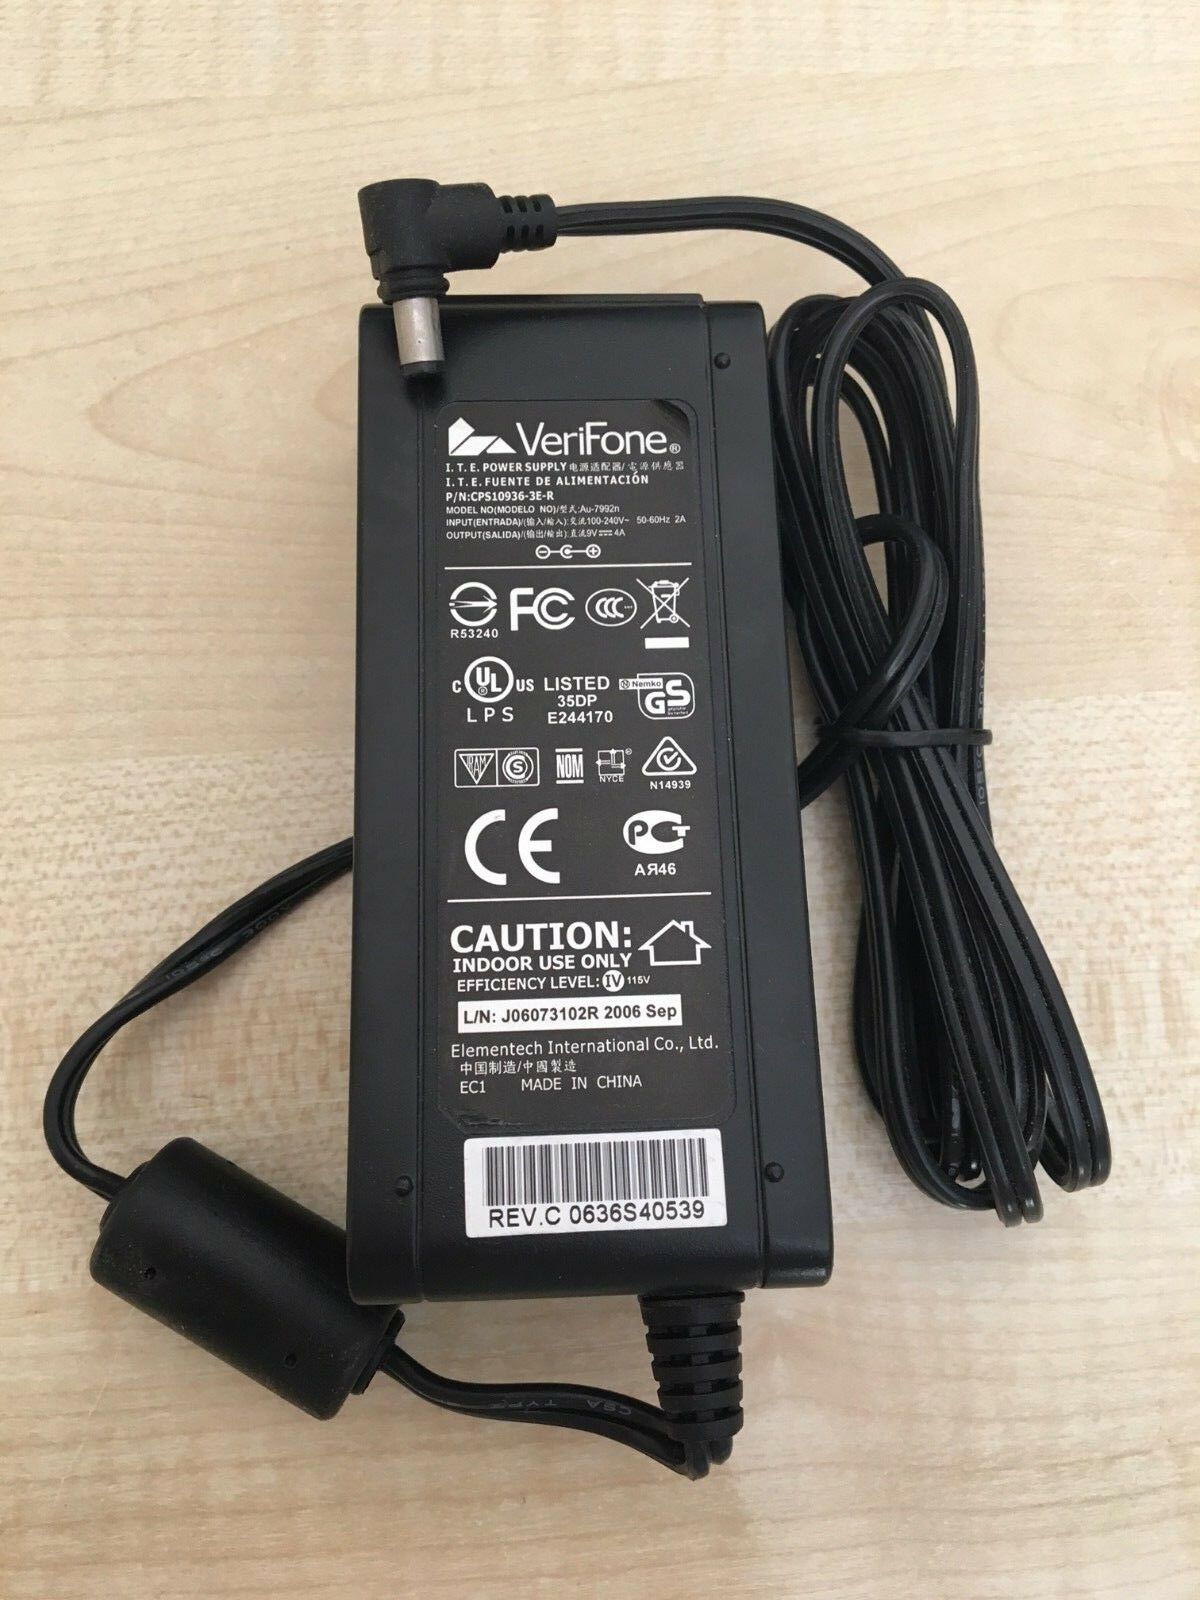 New VeriFone CPS10936-3E-R Omni 3730LE 9V 4A AC Power Adapter for VeriFone POS Charger VX520